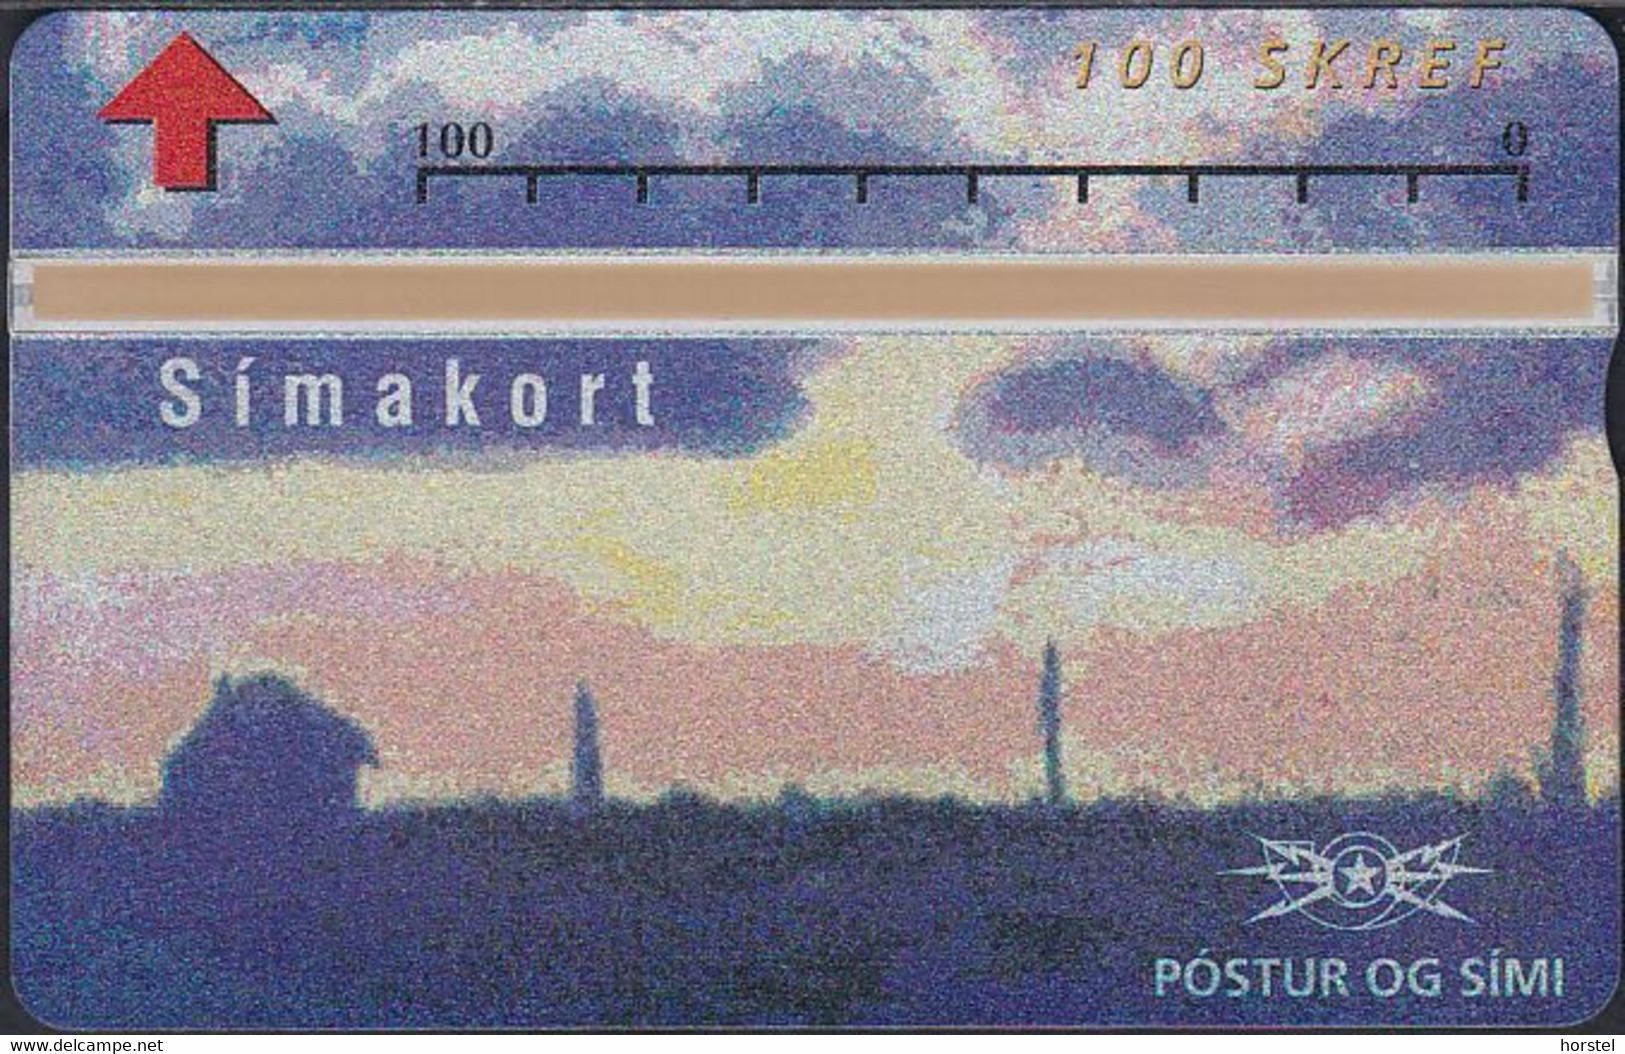 Iceland - D06 - L&G  Painting - View Of Island (1) - 100 Units - 303B - Mint - Iceland